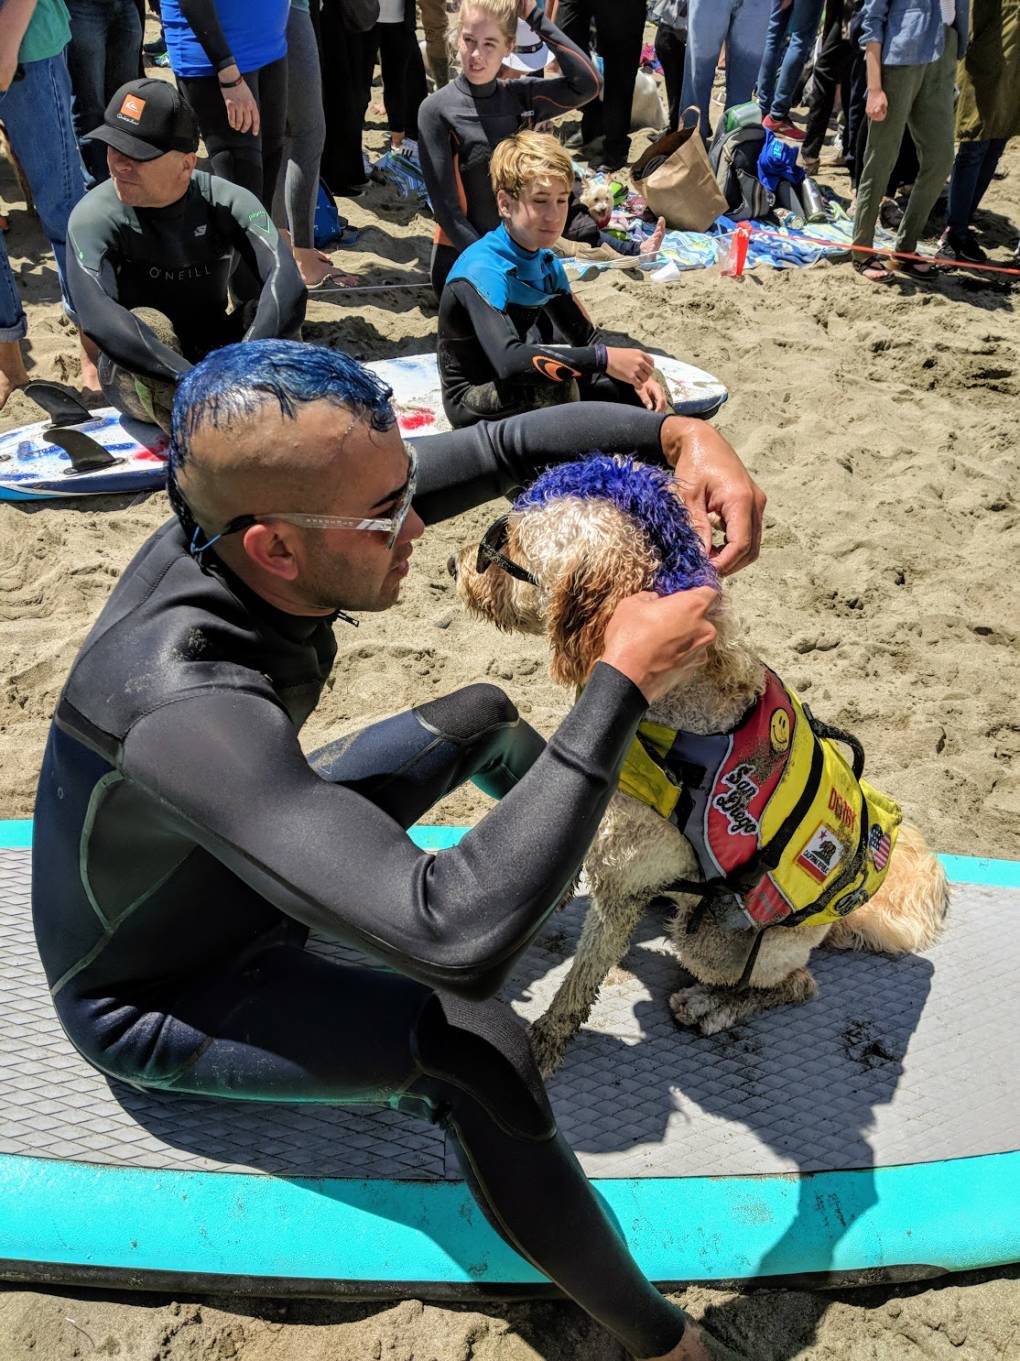 Kentucky Gallahue and his surf dog Derby from San Diego were a crowd favorite with their matching blue mohawks. 